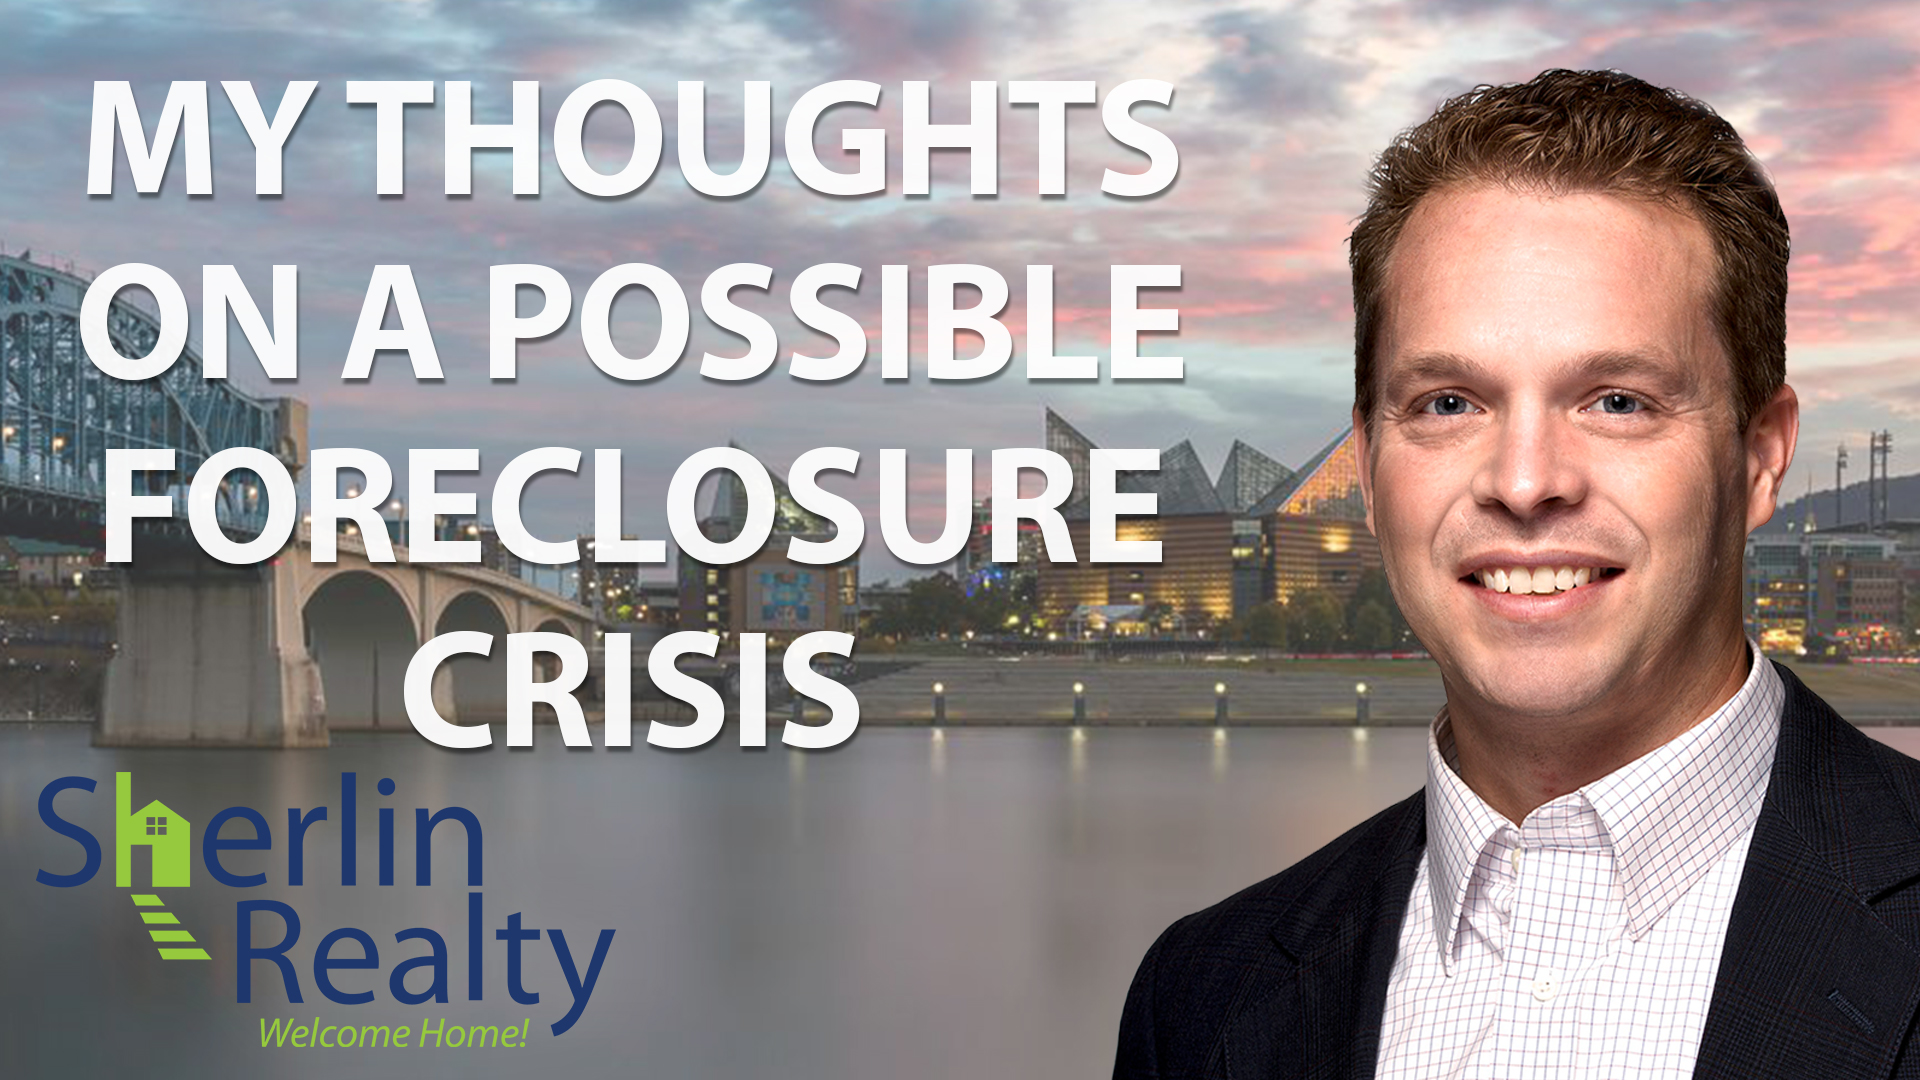 Q: Should You Worry About an Impending Foreclosure Crisis?